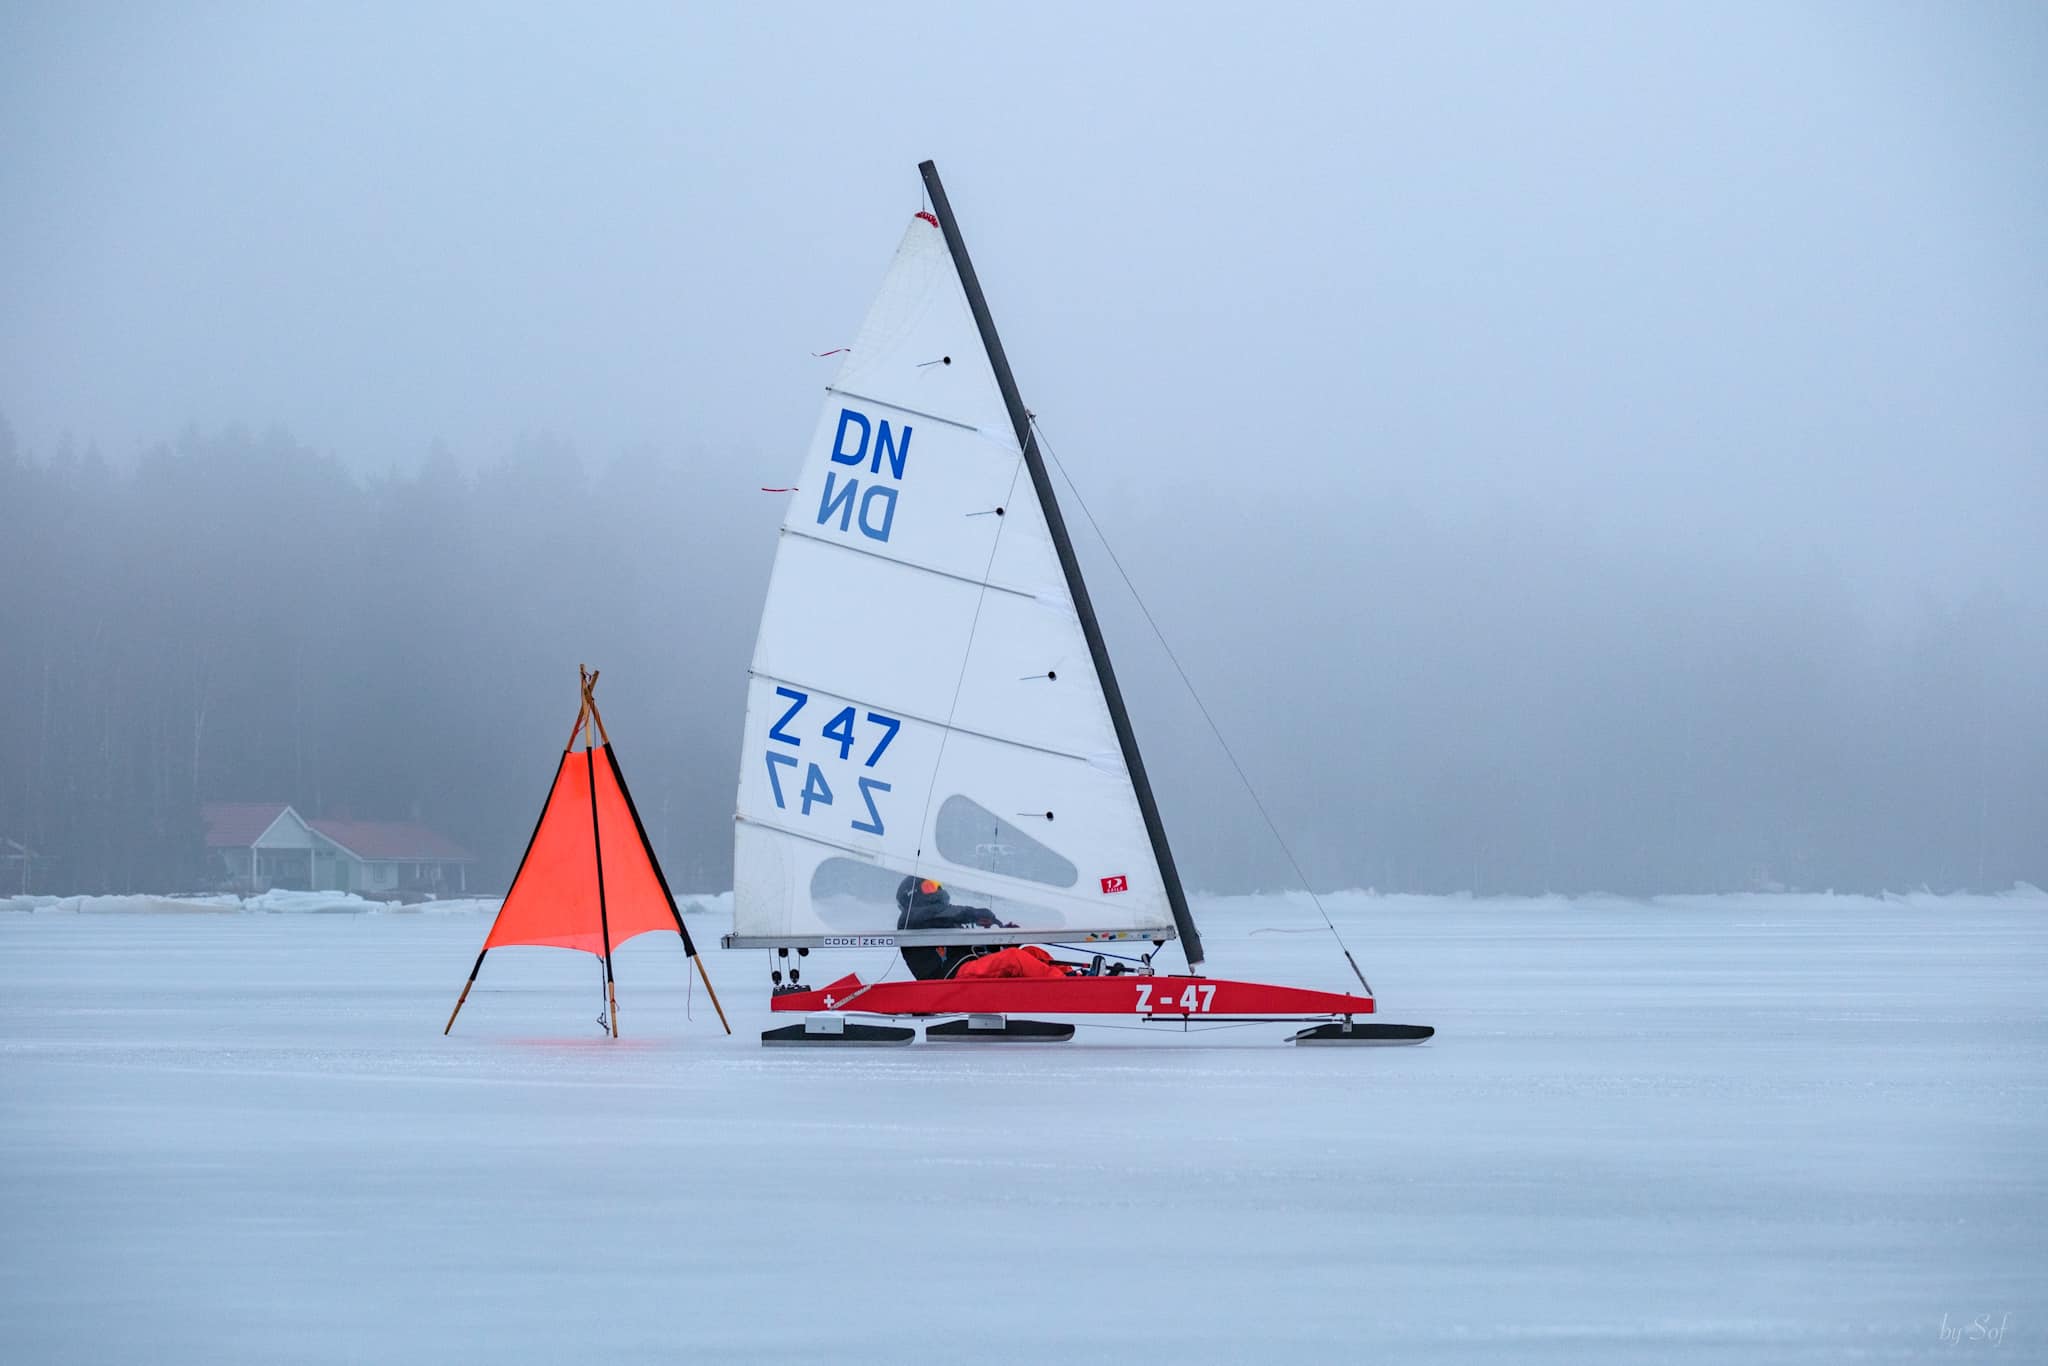  Ice Sailing  DN Grand Masters Cup  Sakylae FIN  Final results